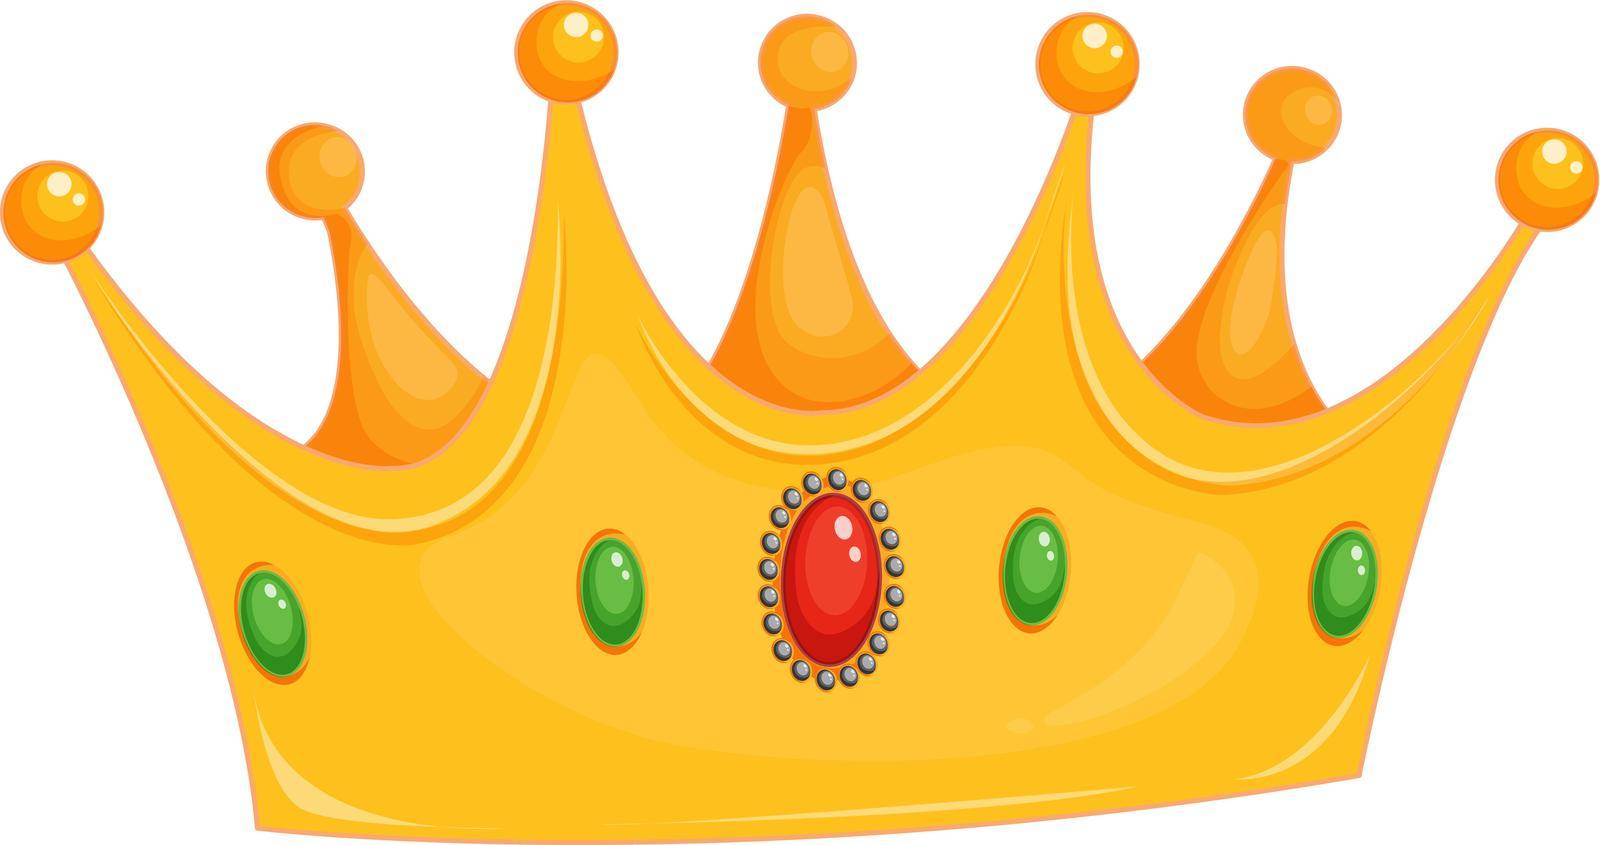 Illustration of a crown on white